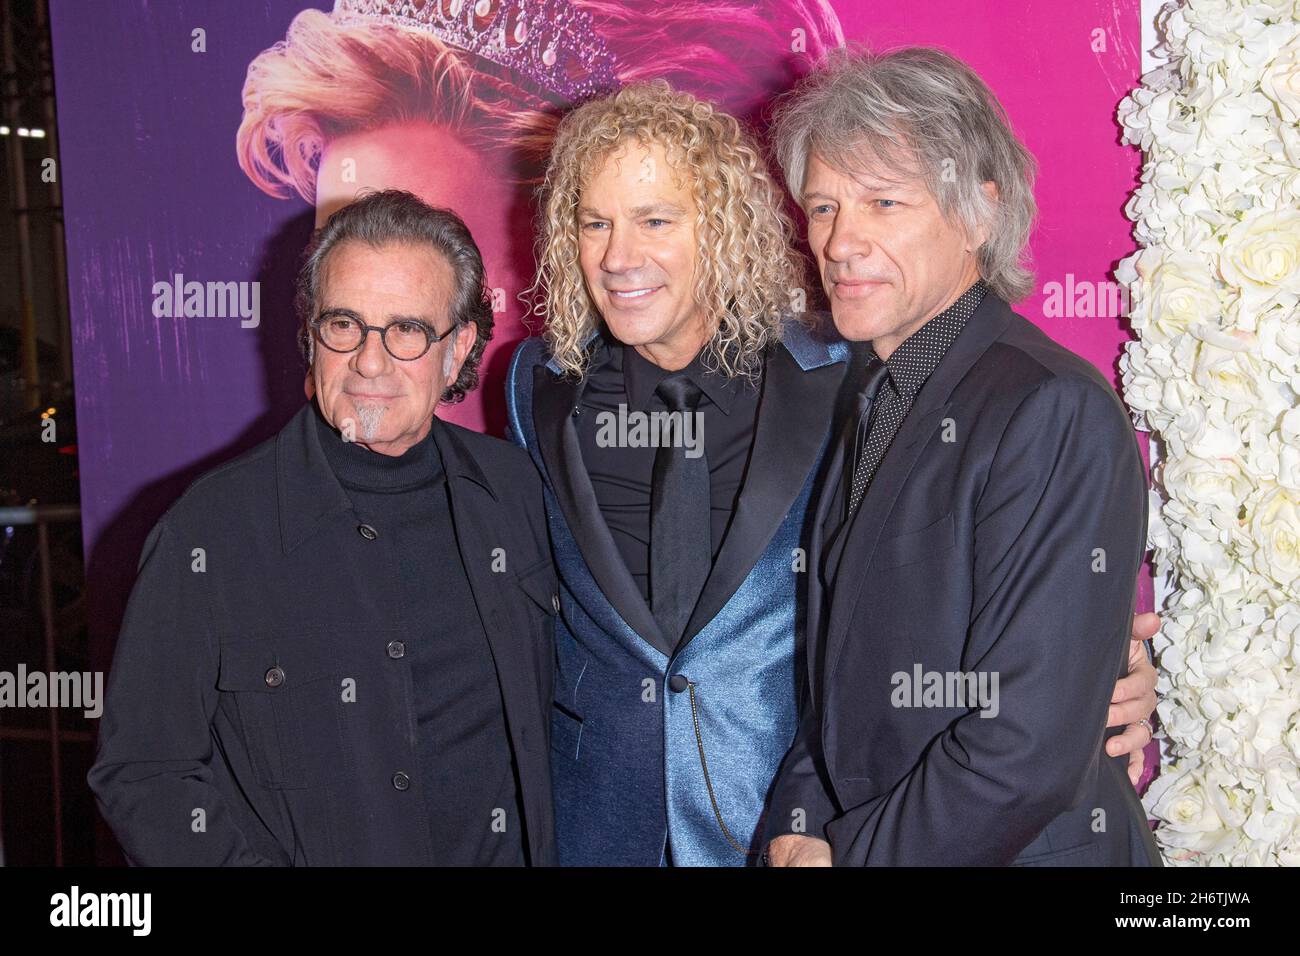 New York, United States. 17th Nov, 2021. Bon Jovi members Tico Torres (L), David Bryan (C), and Jon Bon Jovi (R) attend the opening night of the new musical 'Diana, The Musical' on Broadway at The Longacre Theatre in New York City. Credit: SOPA Images Limited/Alamy Live News Stock Photo